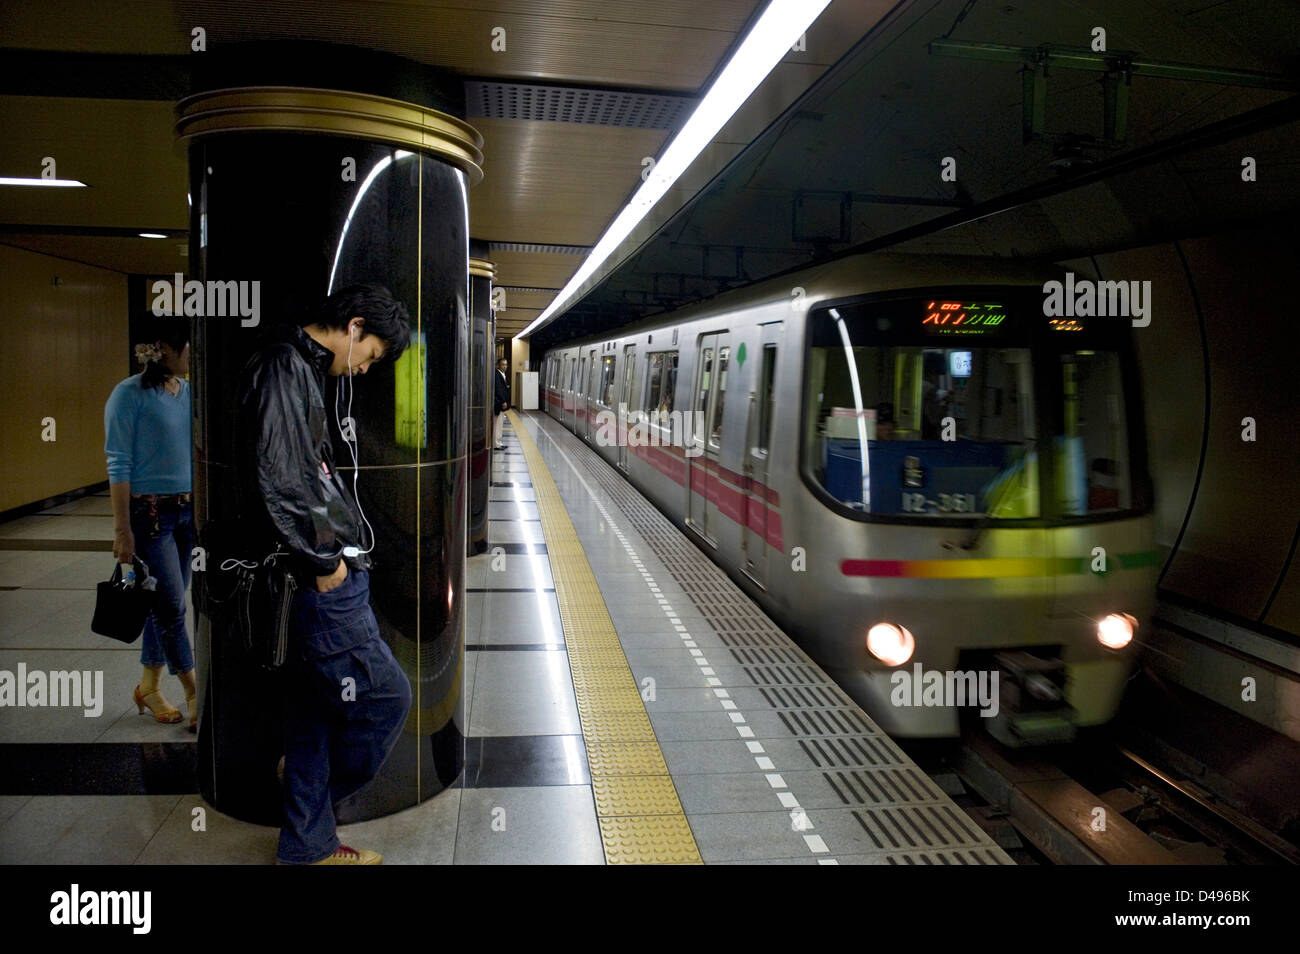 Passengers waiting for subway train arriving at underground platform in the Tokyo Metro railway transportation system in Japan Stock Photo